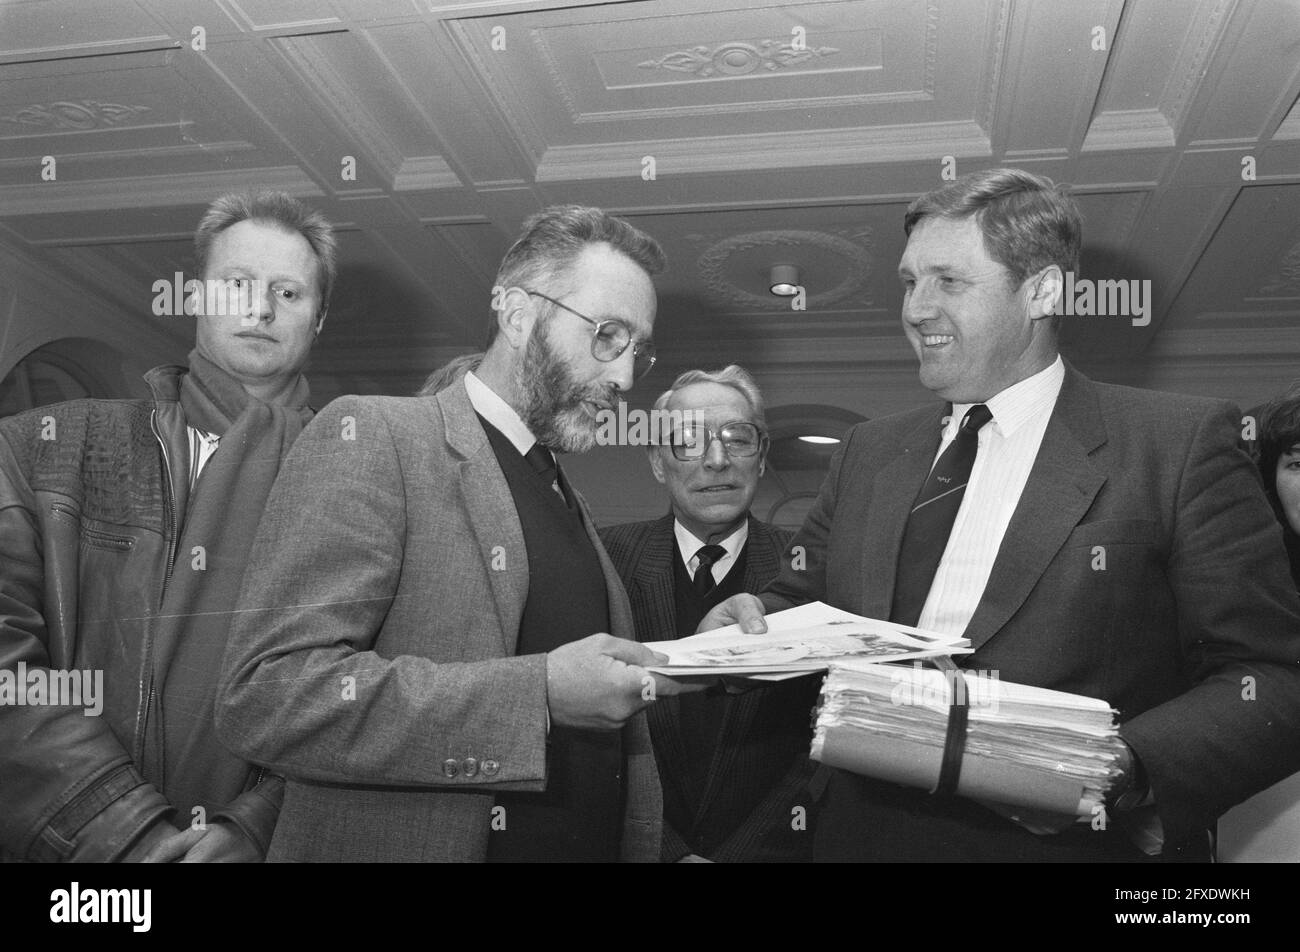 Stichting Pitt Bull Belangen offers report to Kamercie Landbouw; chairman Van Herpen (SPBB) (l) and chairman Blaunt (r), December 6, 1988, REPORTS, chamber committees, The Netherlands, 20th century press agency photo, news to remember, documentary, historic photography 1945-1990, visual stories, human history of the Twentieth Century, capturing moments in time Stock Photo